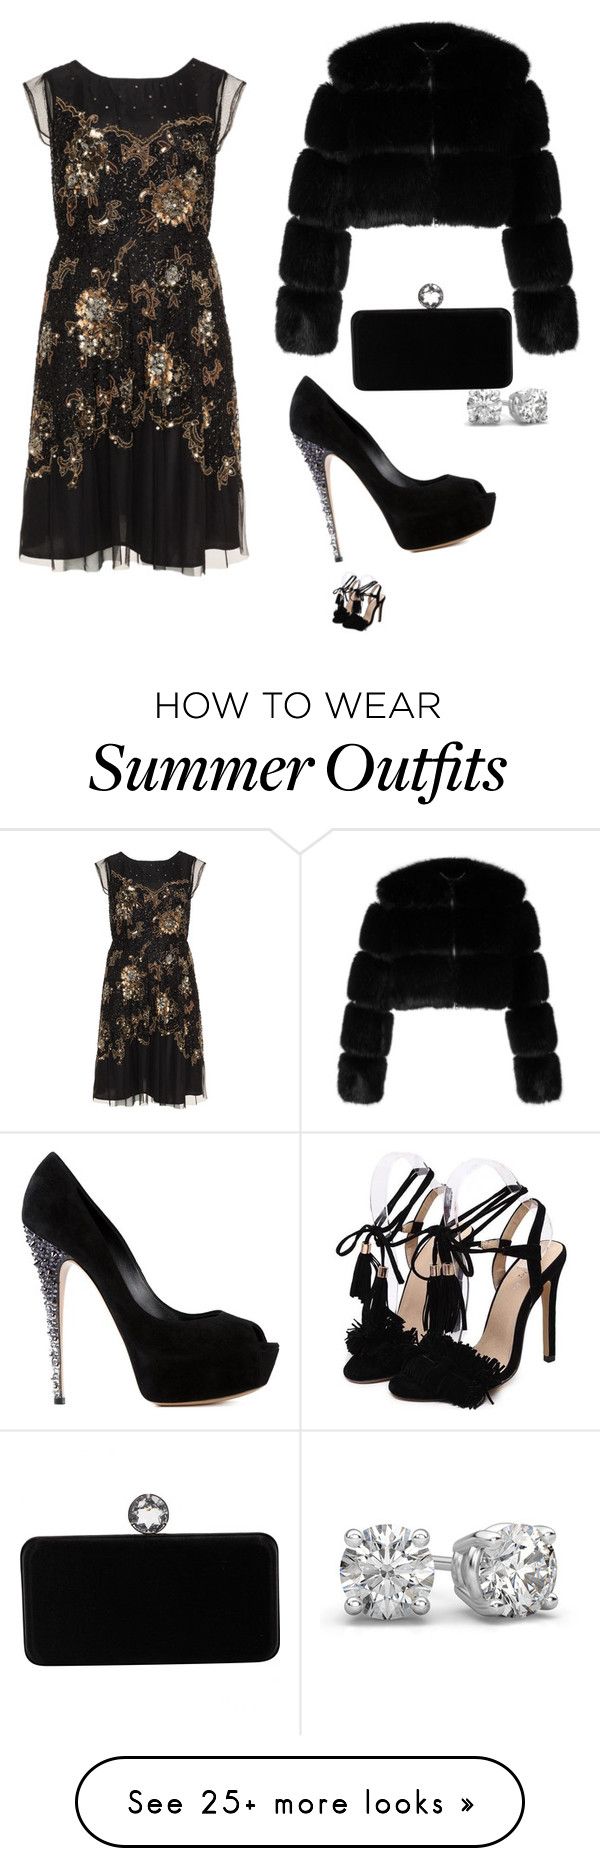 "My First Polyvore Outfit" by gisear on Polyvore featuring navabi, Giv...